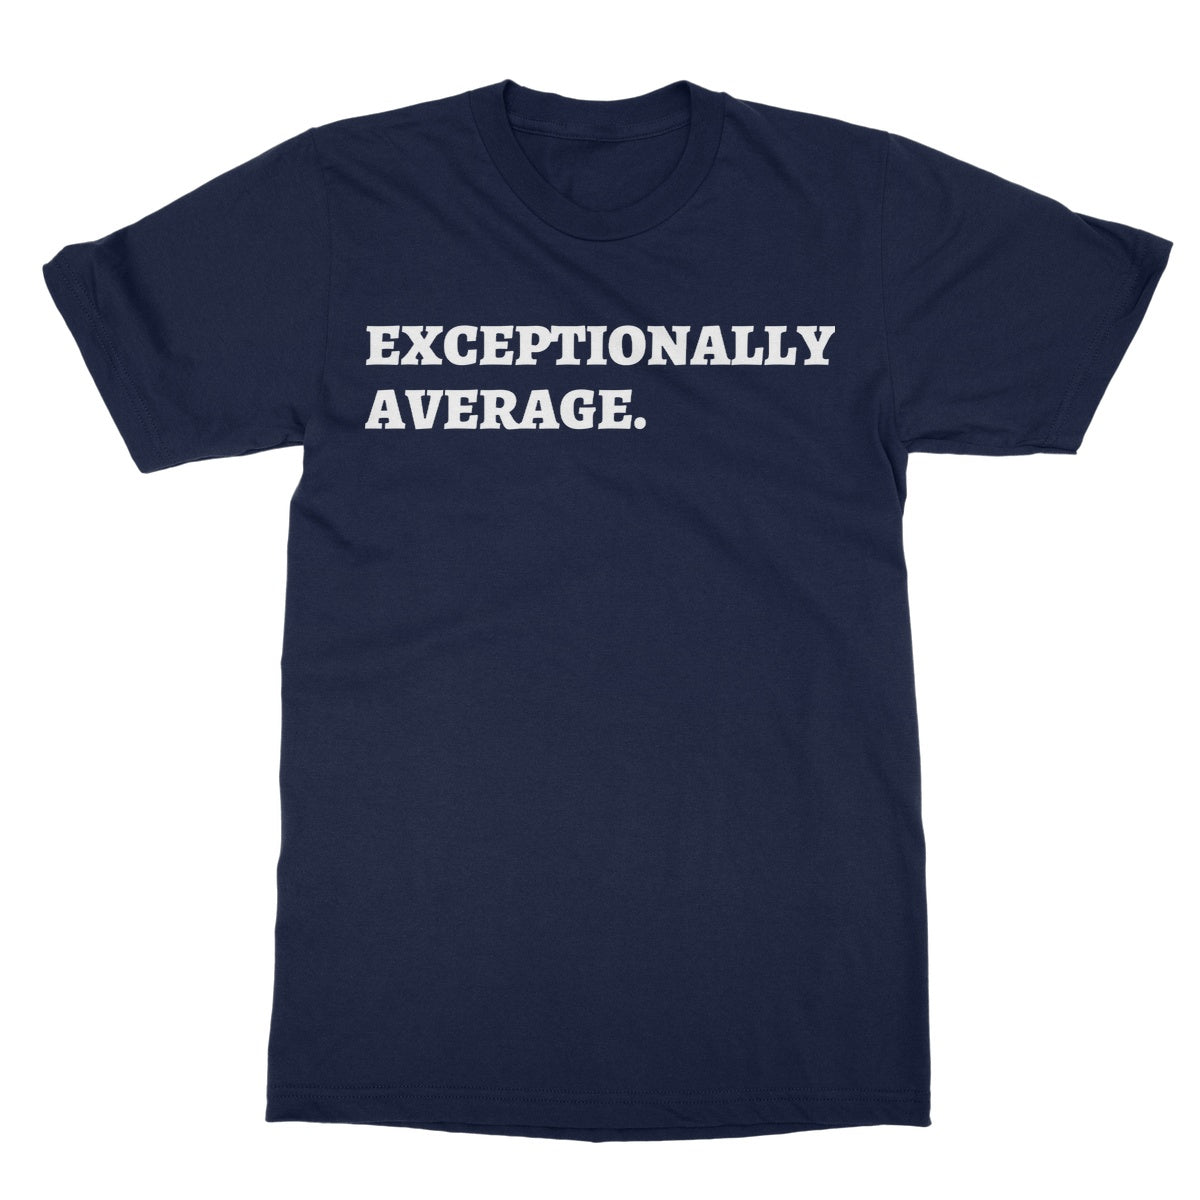 exceptionally average t shirt navy